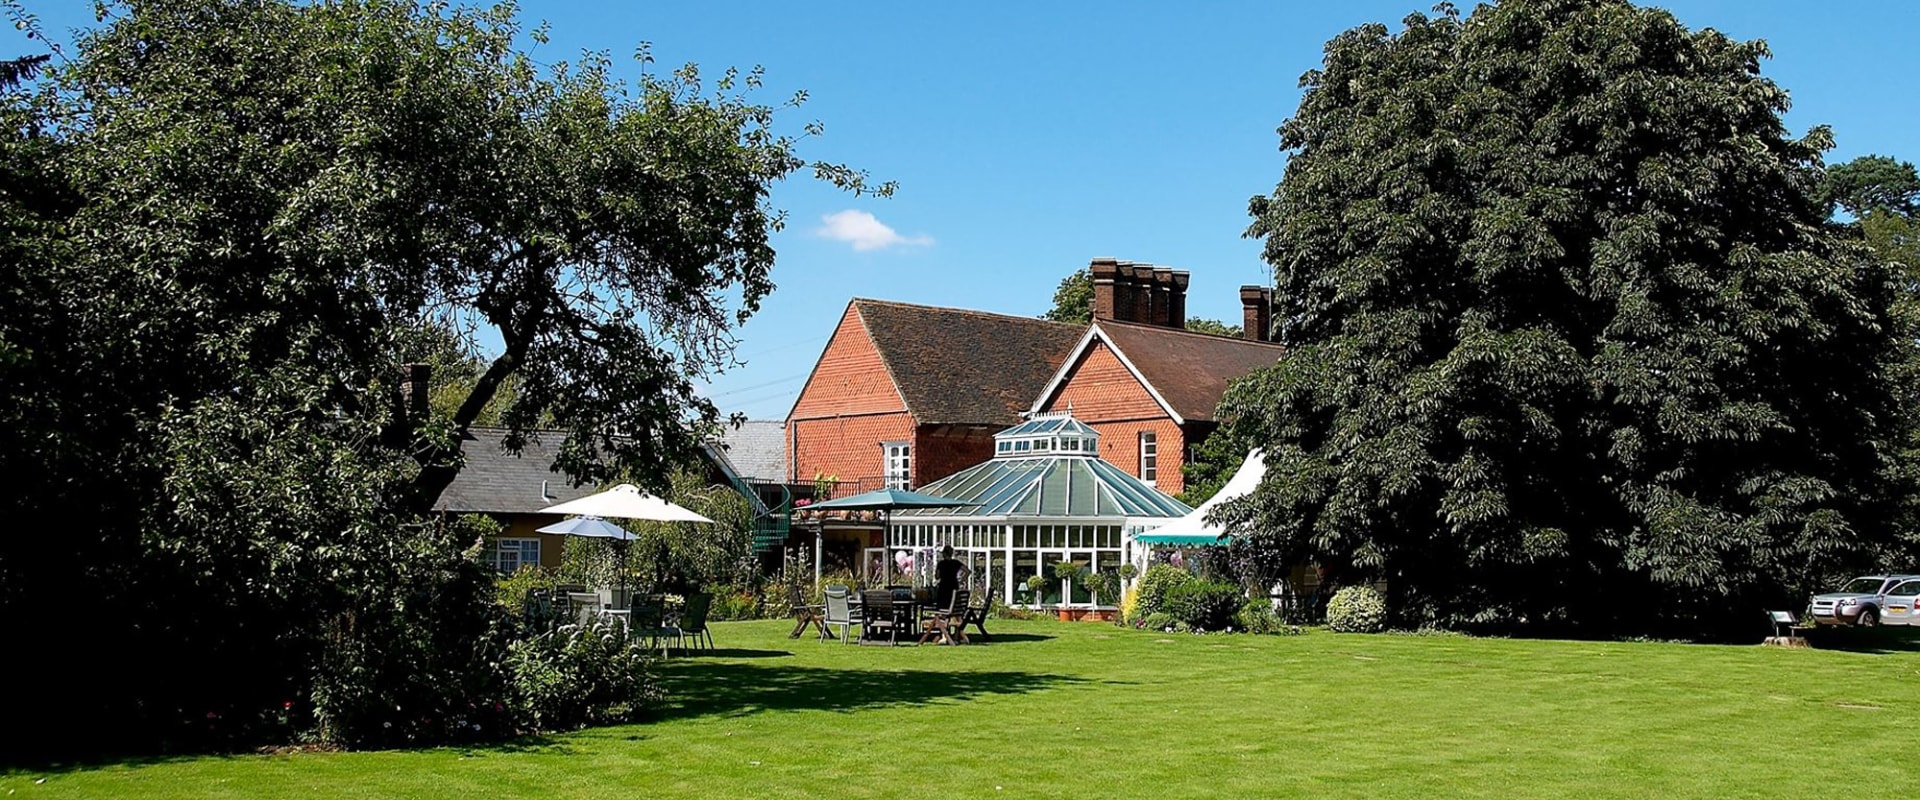 The Best Inns to Stay in Hertfordshire